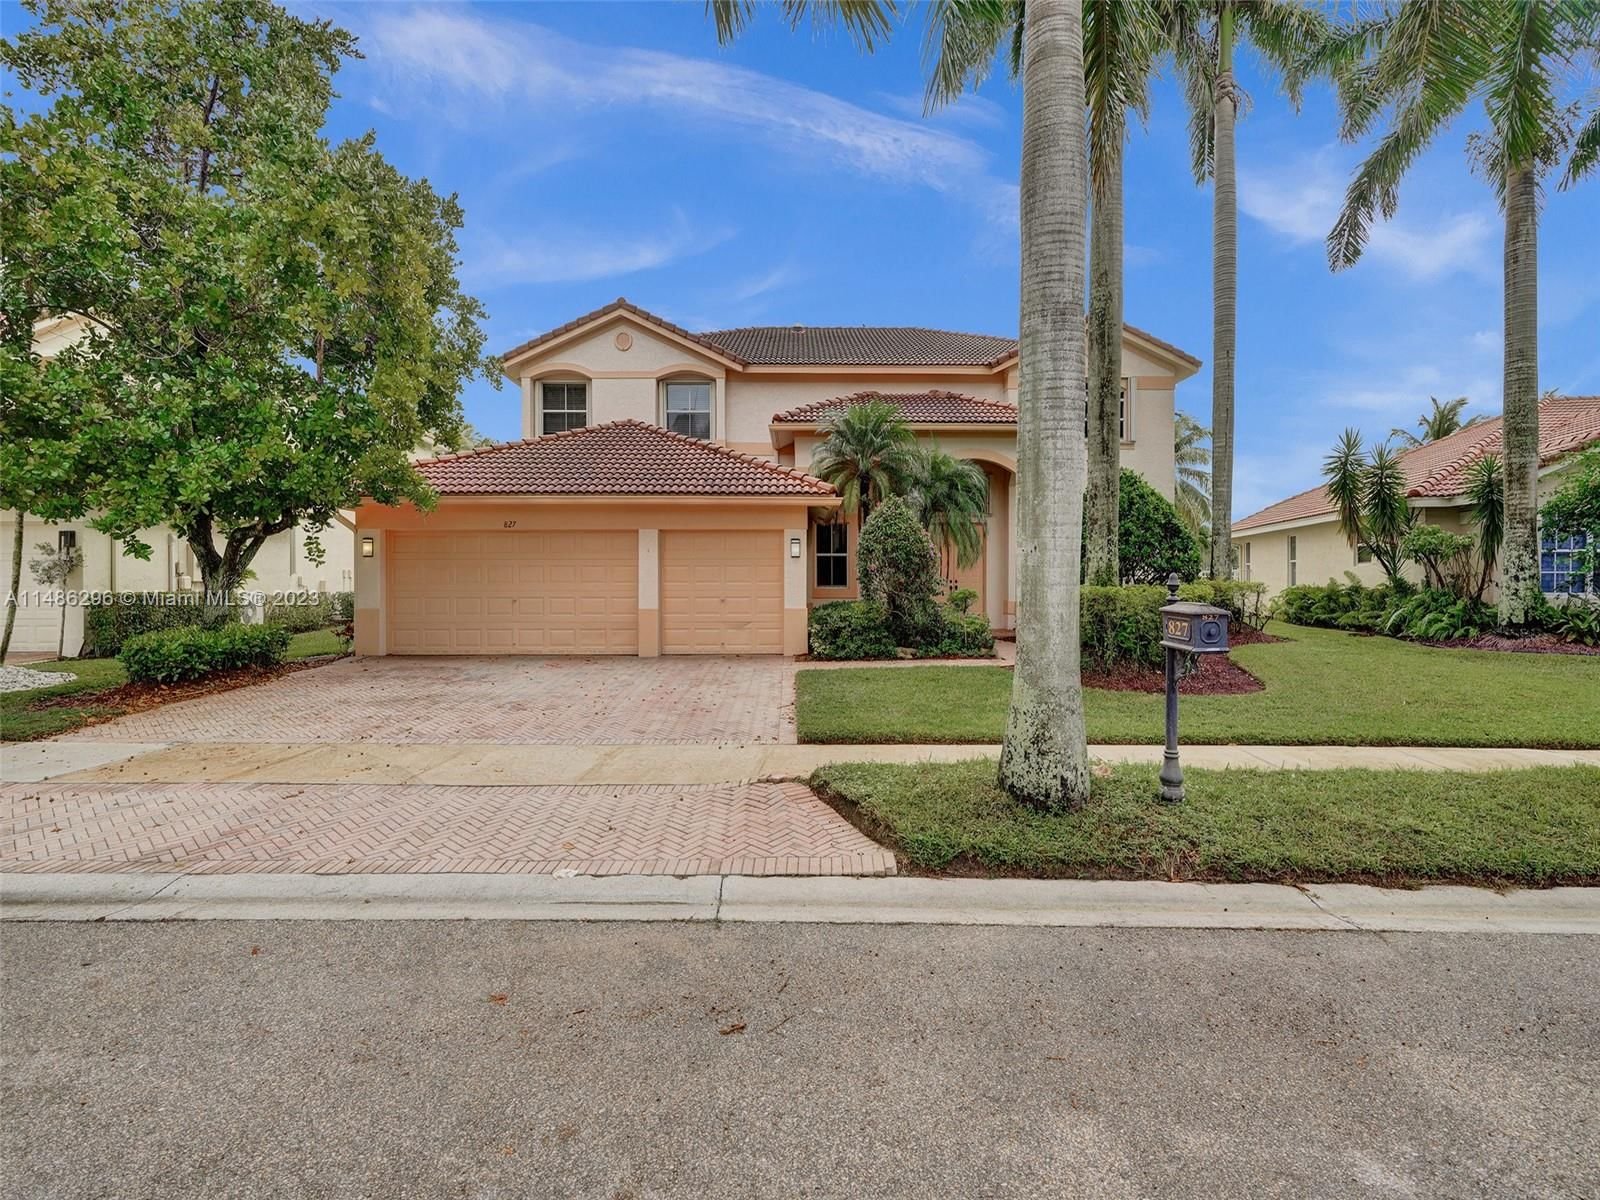 Real estate property located at 827 Regal Cove Rd, Broward County, Cove III, Weston, FL